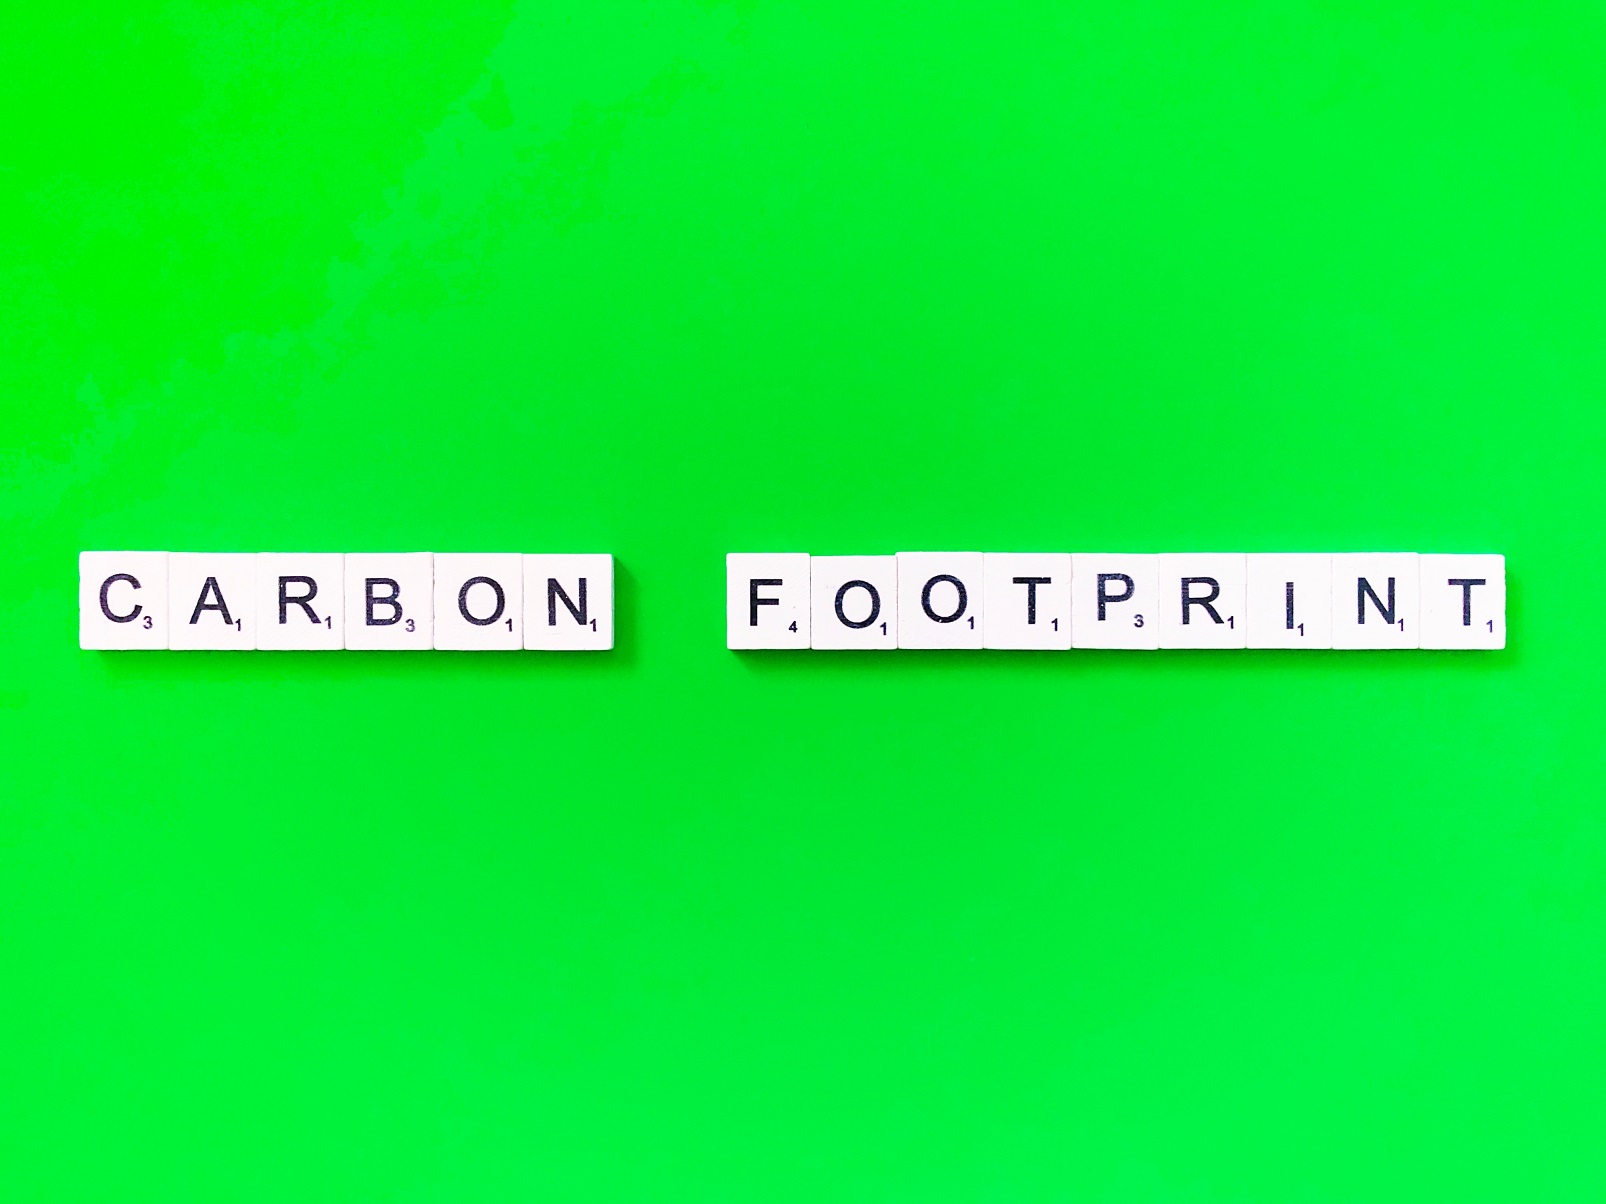 Carbon Footprints Part 2 – so you want to determine your carbon emissions? Where do you start?